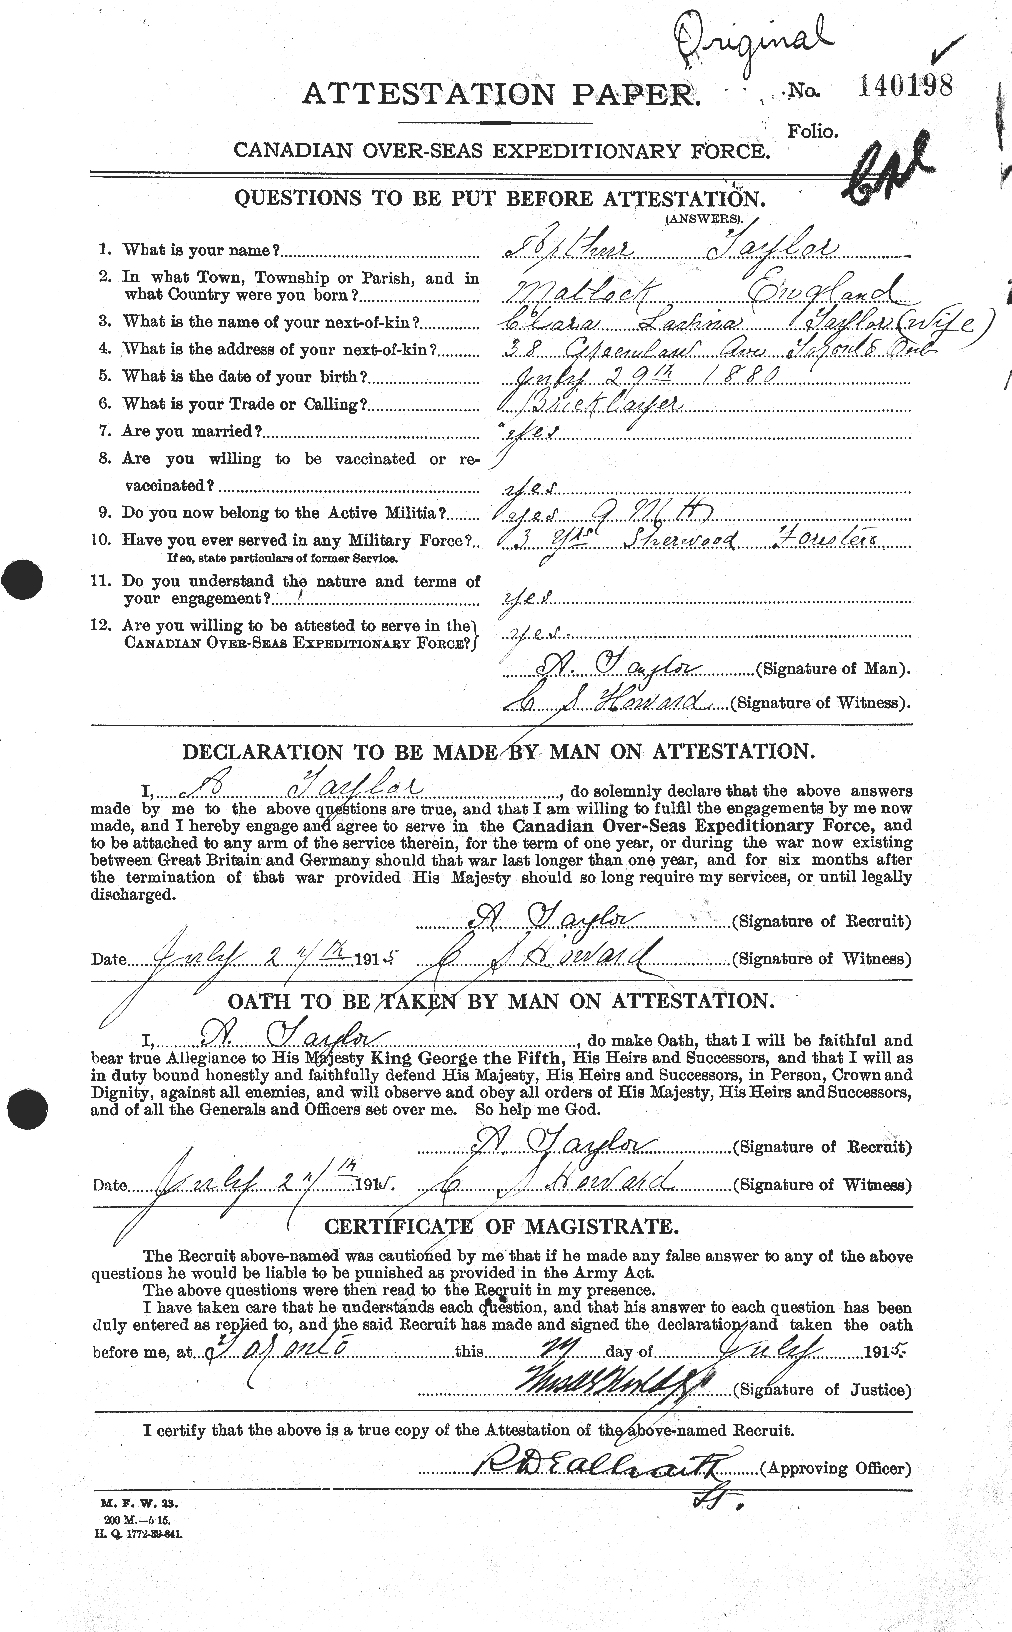 Personnel Records of the First World War - CEF 626702a